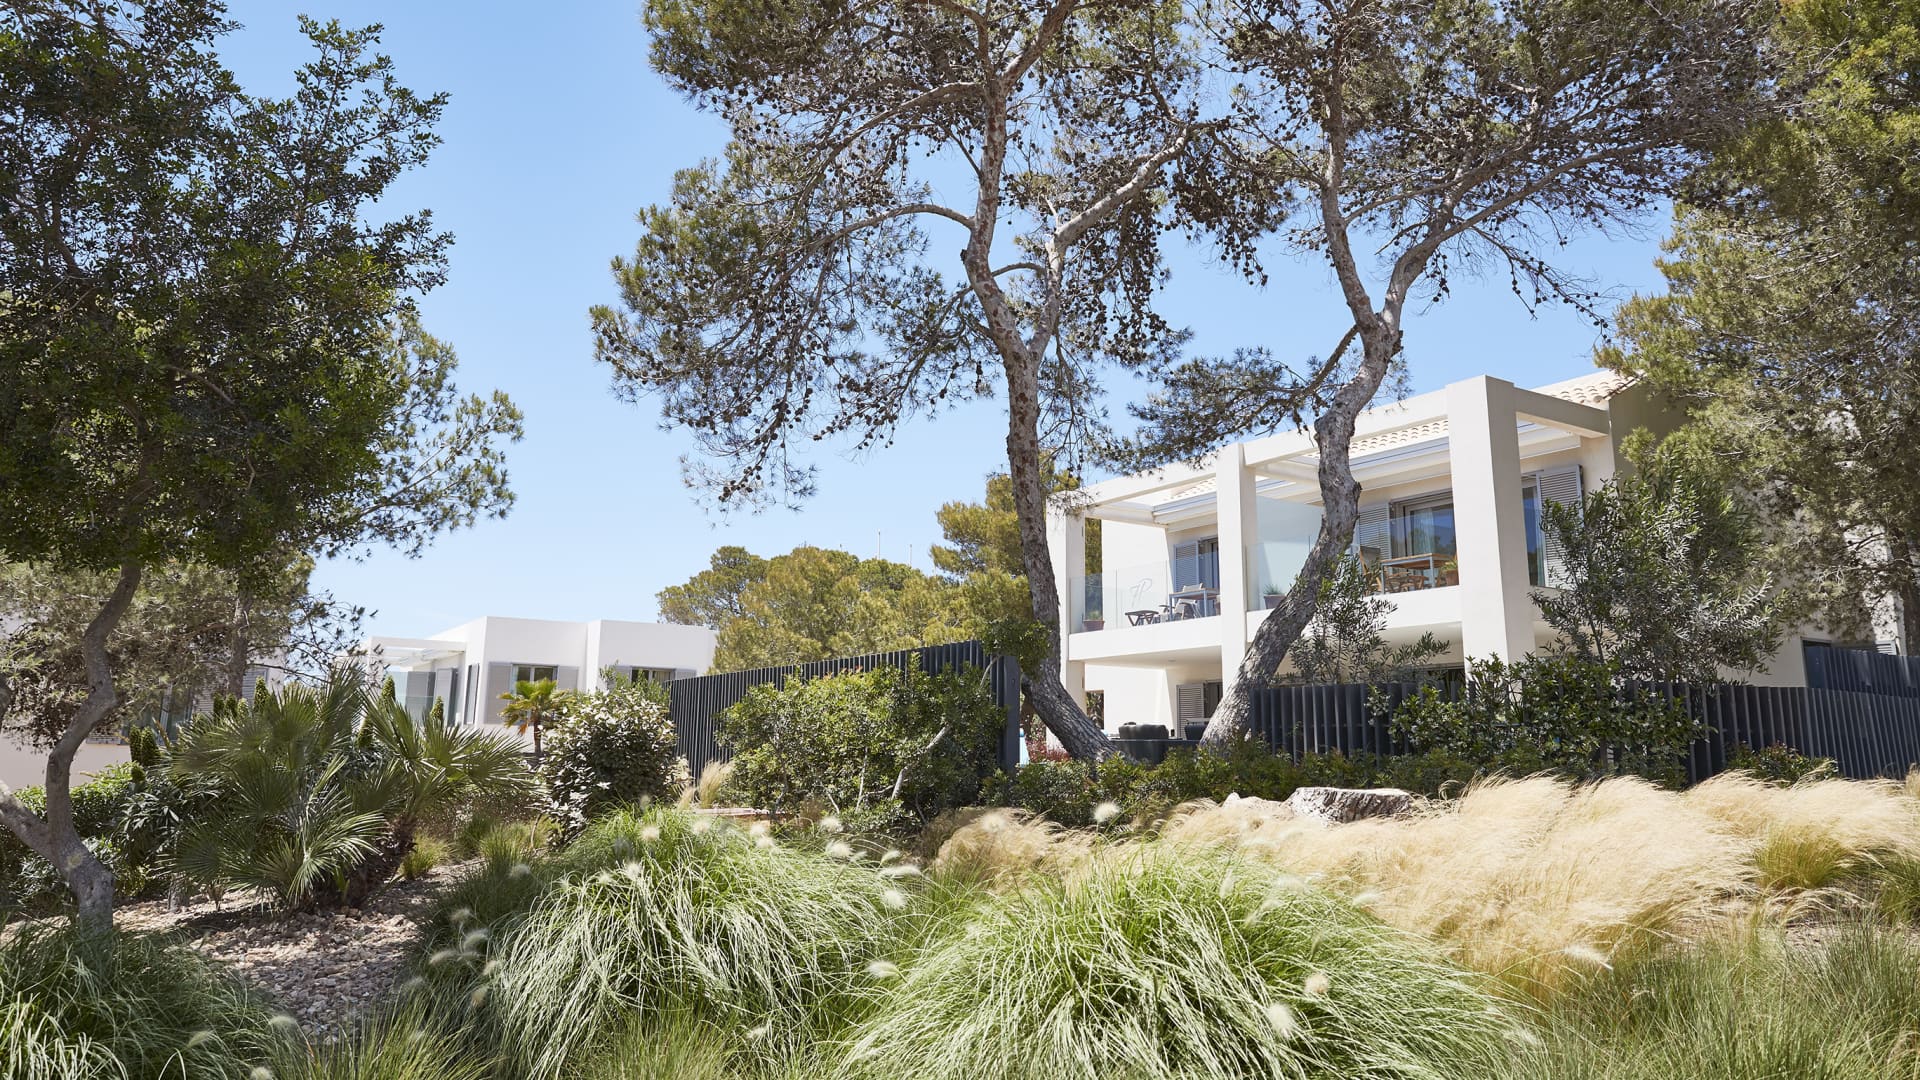 A six-night trip to Ibiza with travel company Black Tomato — with stays at places like the 7Pines Resort Ibiza (here) — starts at around £6,100 ($7,260) per person, excluding flights.